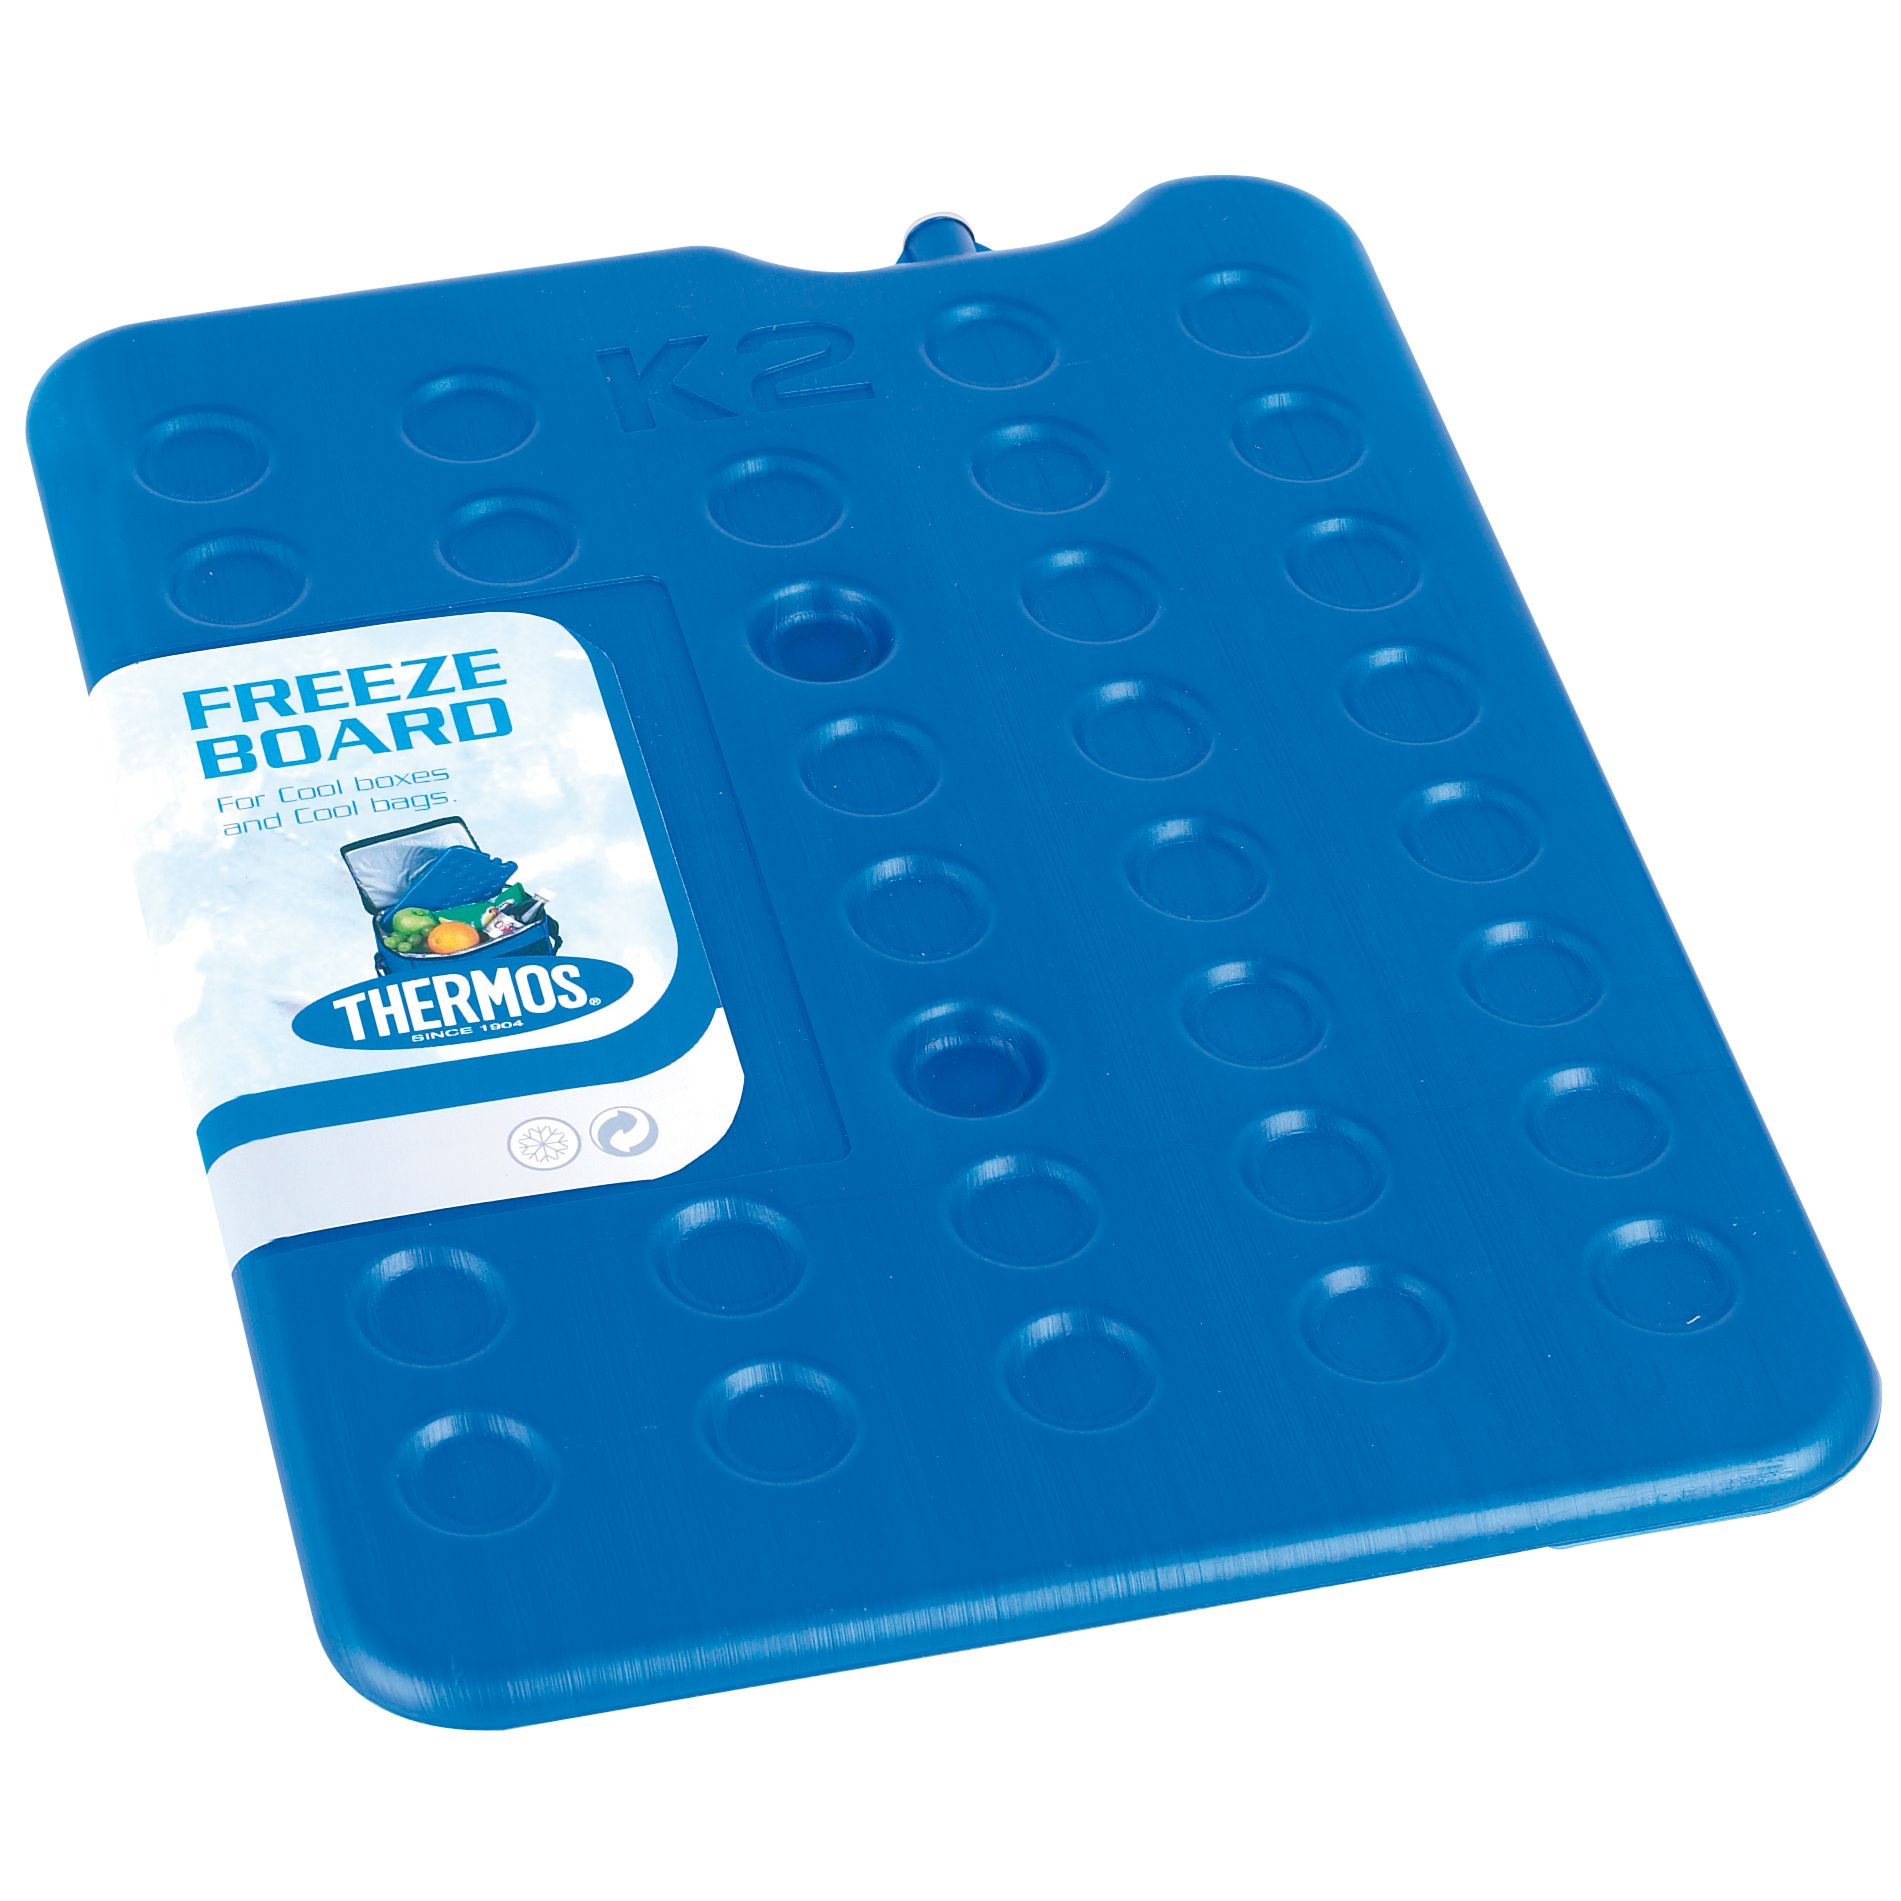 Thermos Freezer Board, Large, 800g